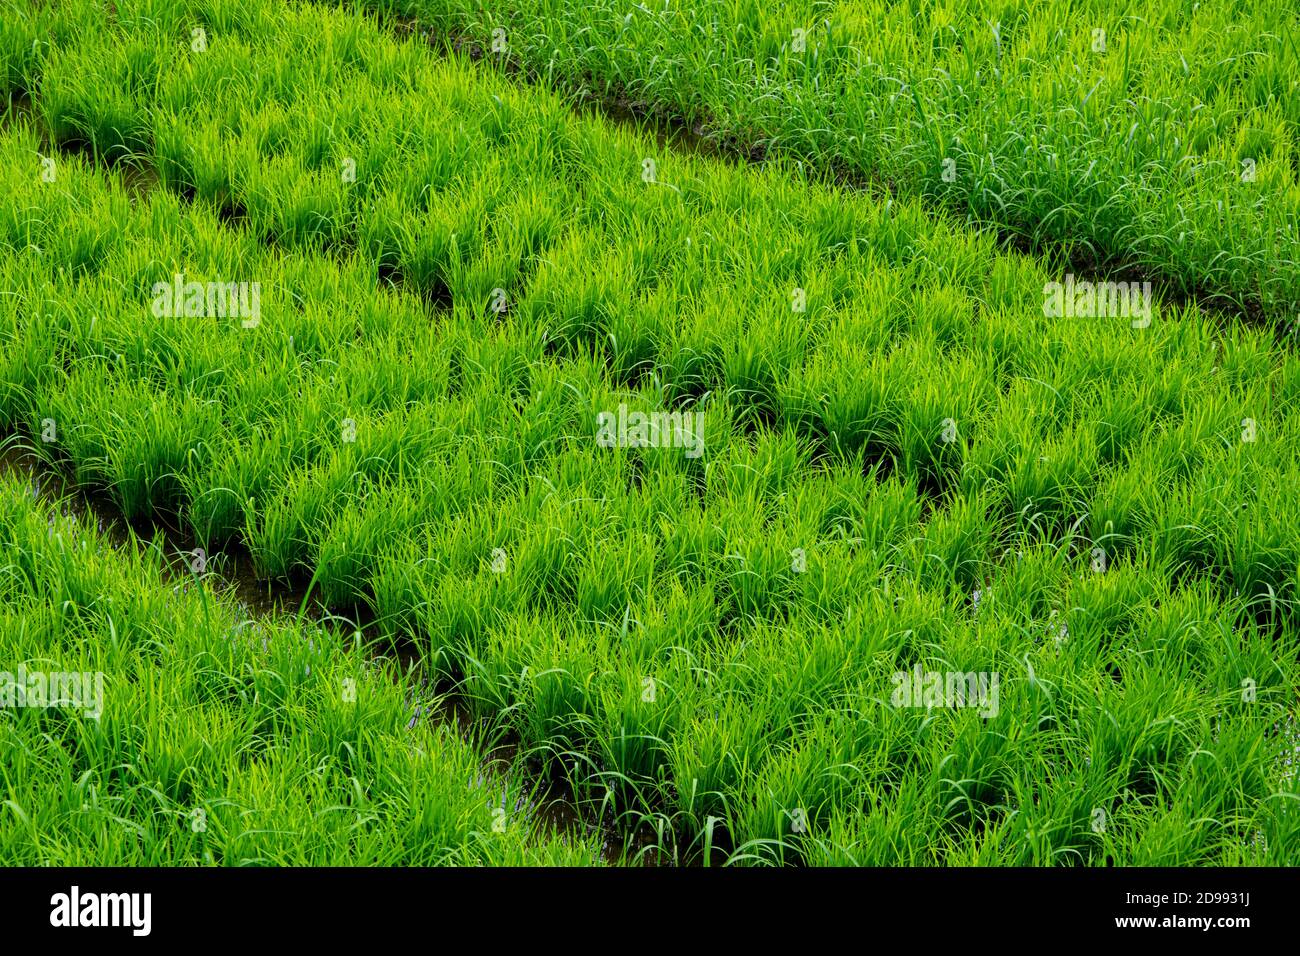 High angle view of a rice field agriculture landscape in the Philippines, Asia, where rice crops are growing. Stock Photo